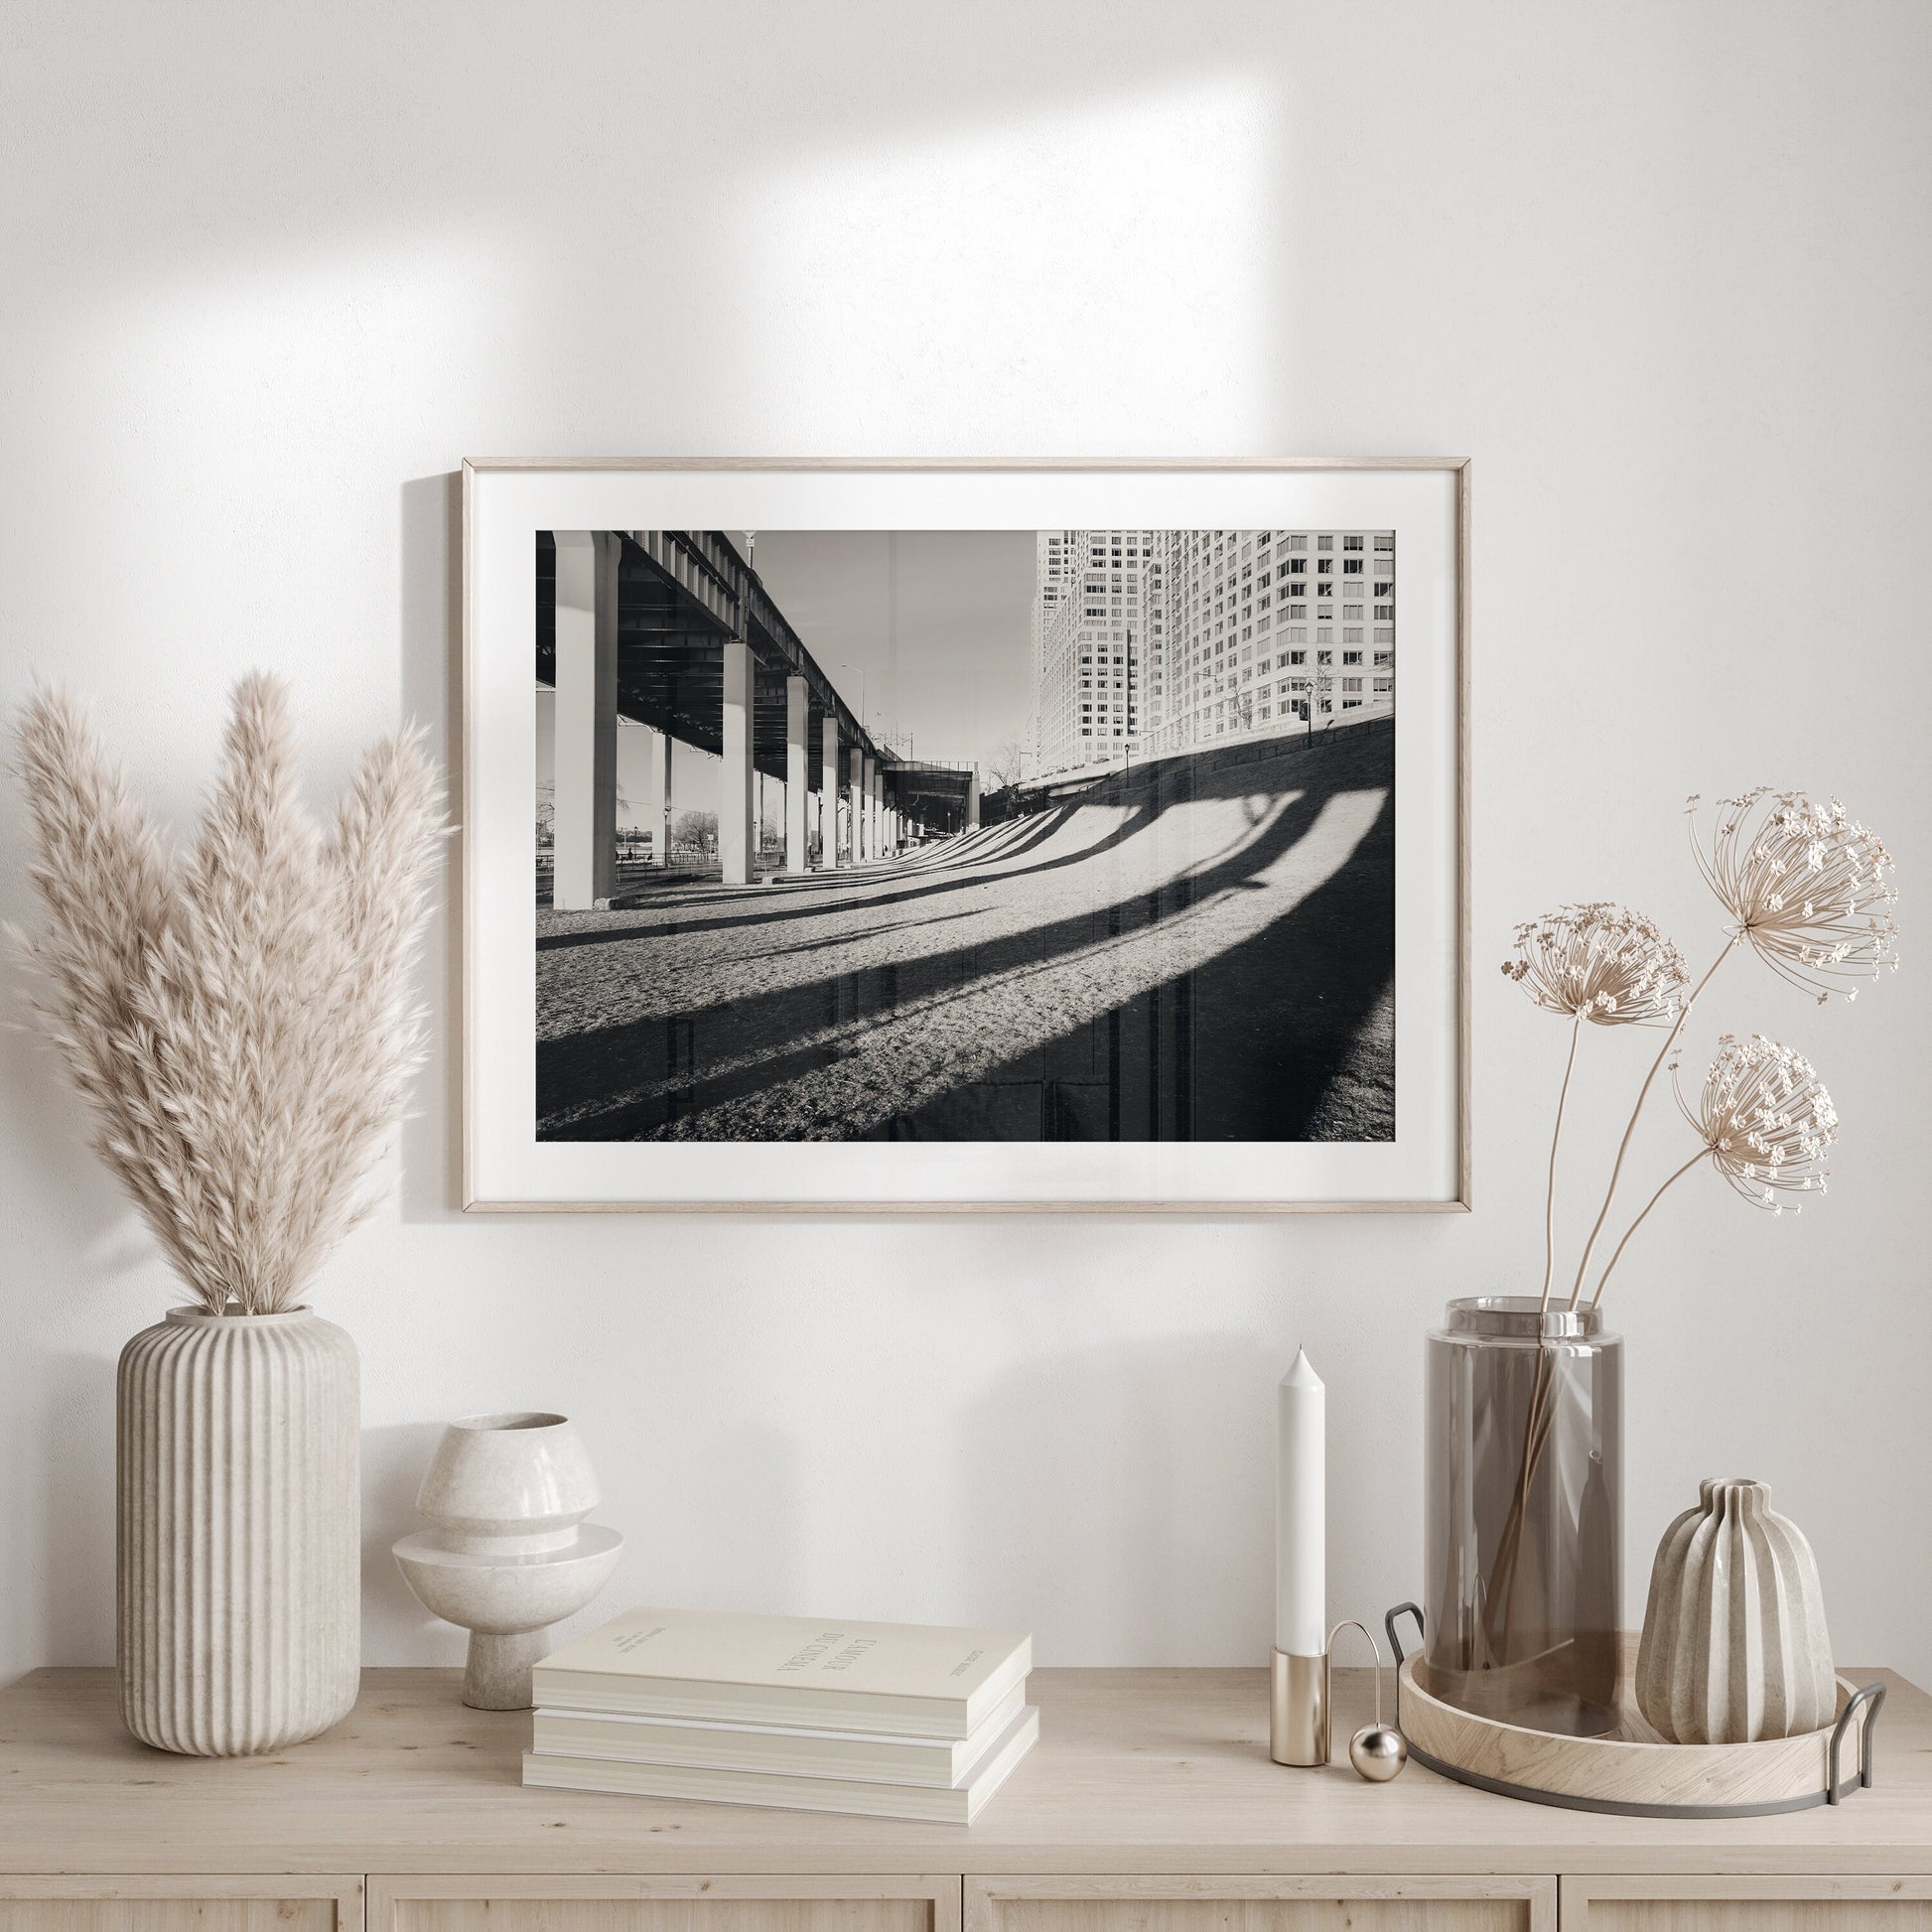 Black and White Photography Shadow Landscape Riverside NYC Print Upper West Side Manhattan Wall Art Museum-quality Photo Shadow Wall Art